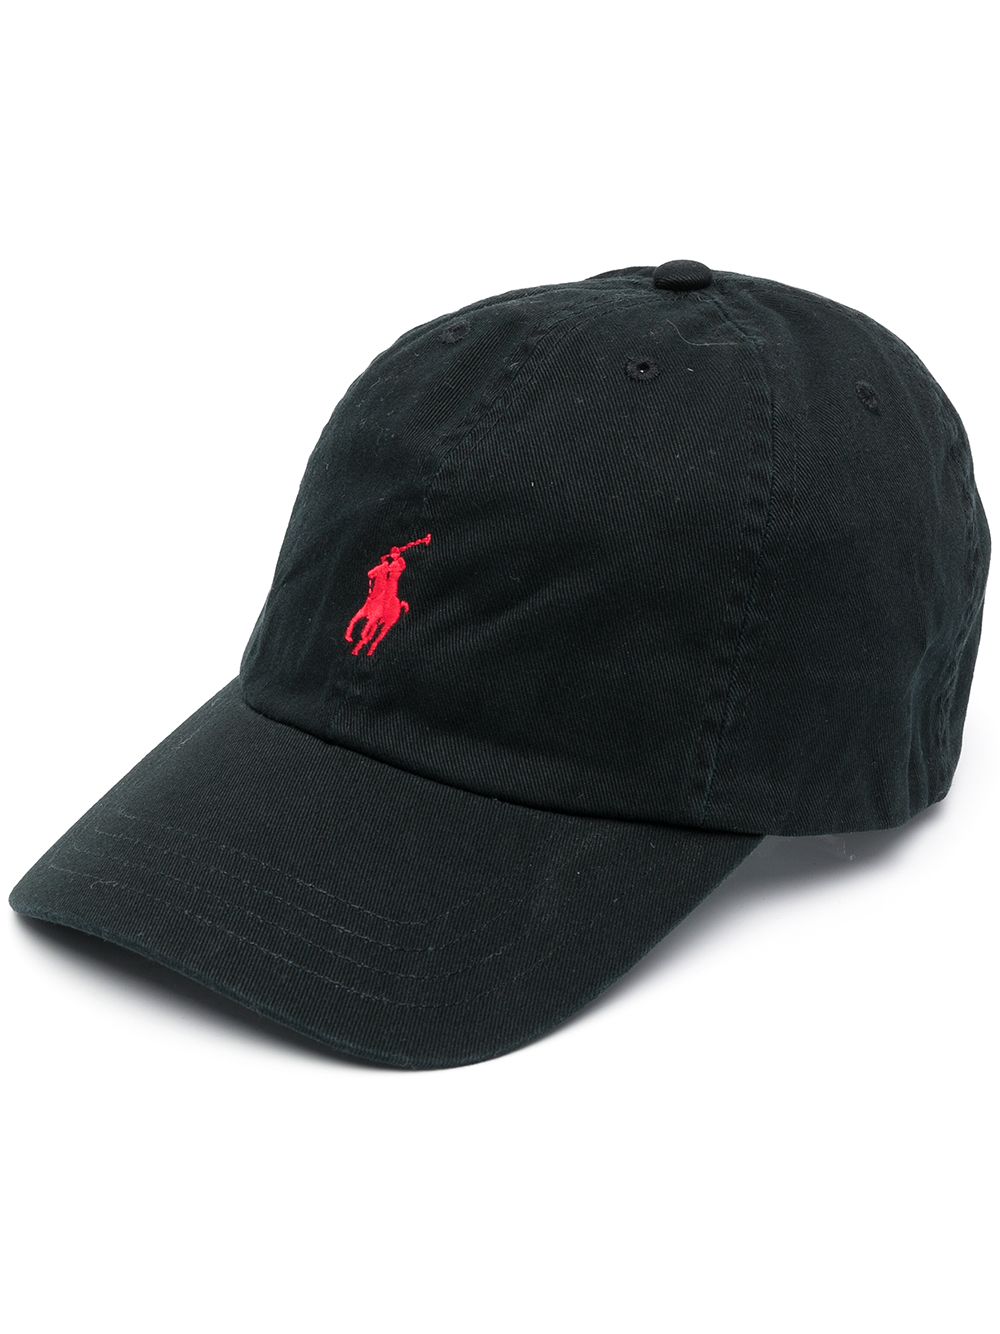 Black/red cotton embroidered logo baseball cap